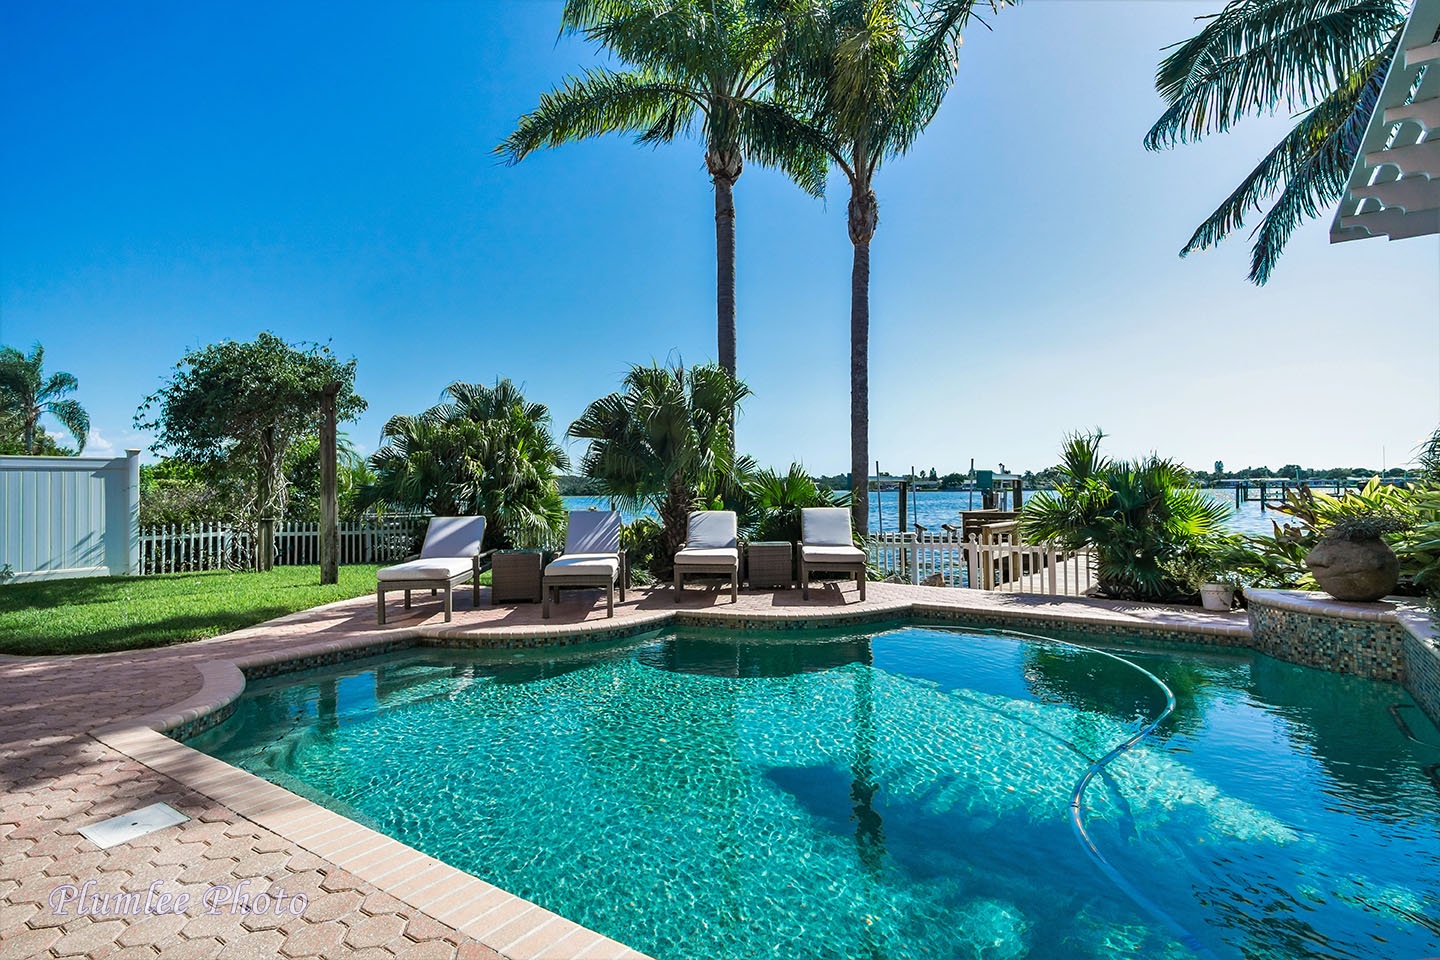 Ohana House has a heated pool and is located on the Intracoastal Waterway.